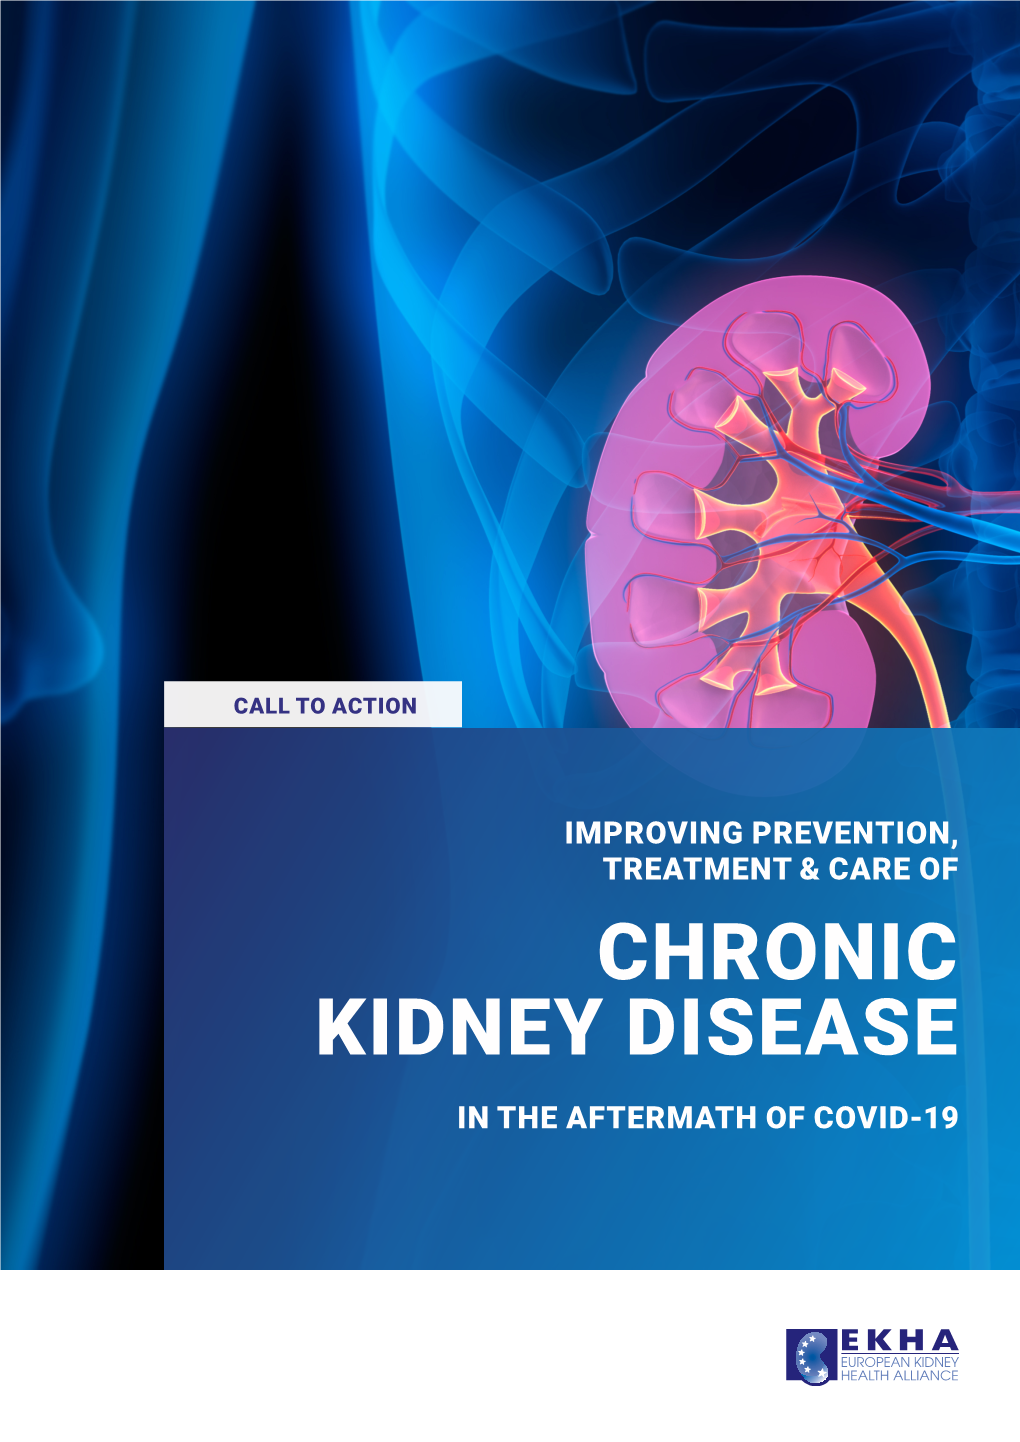 CHRONIC KIDNEY DISEASE in the AFTERMATH of COVID-19 Introduction